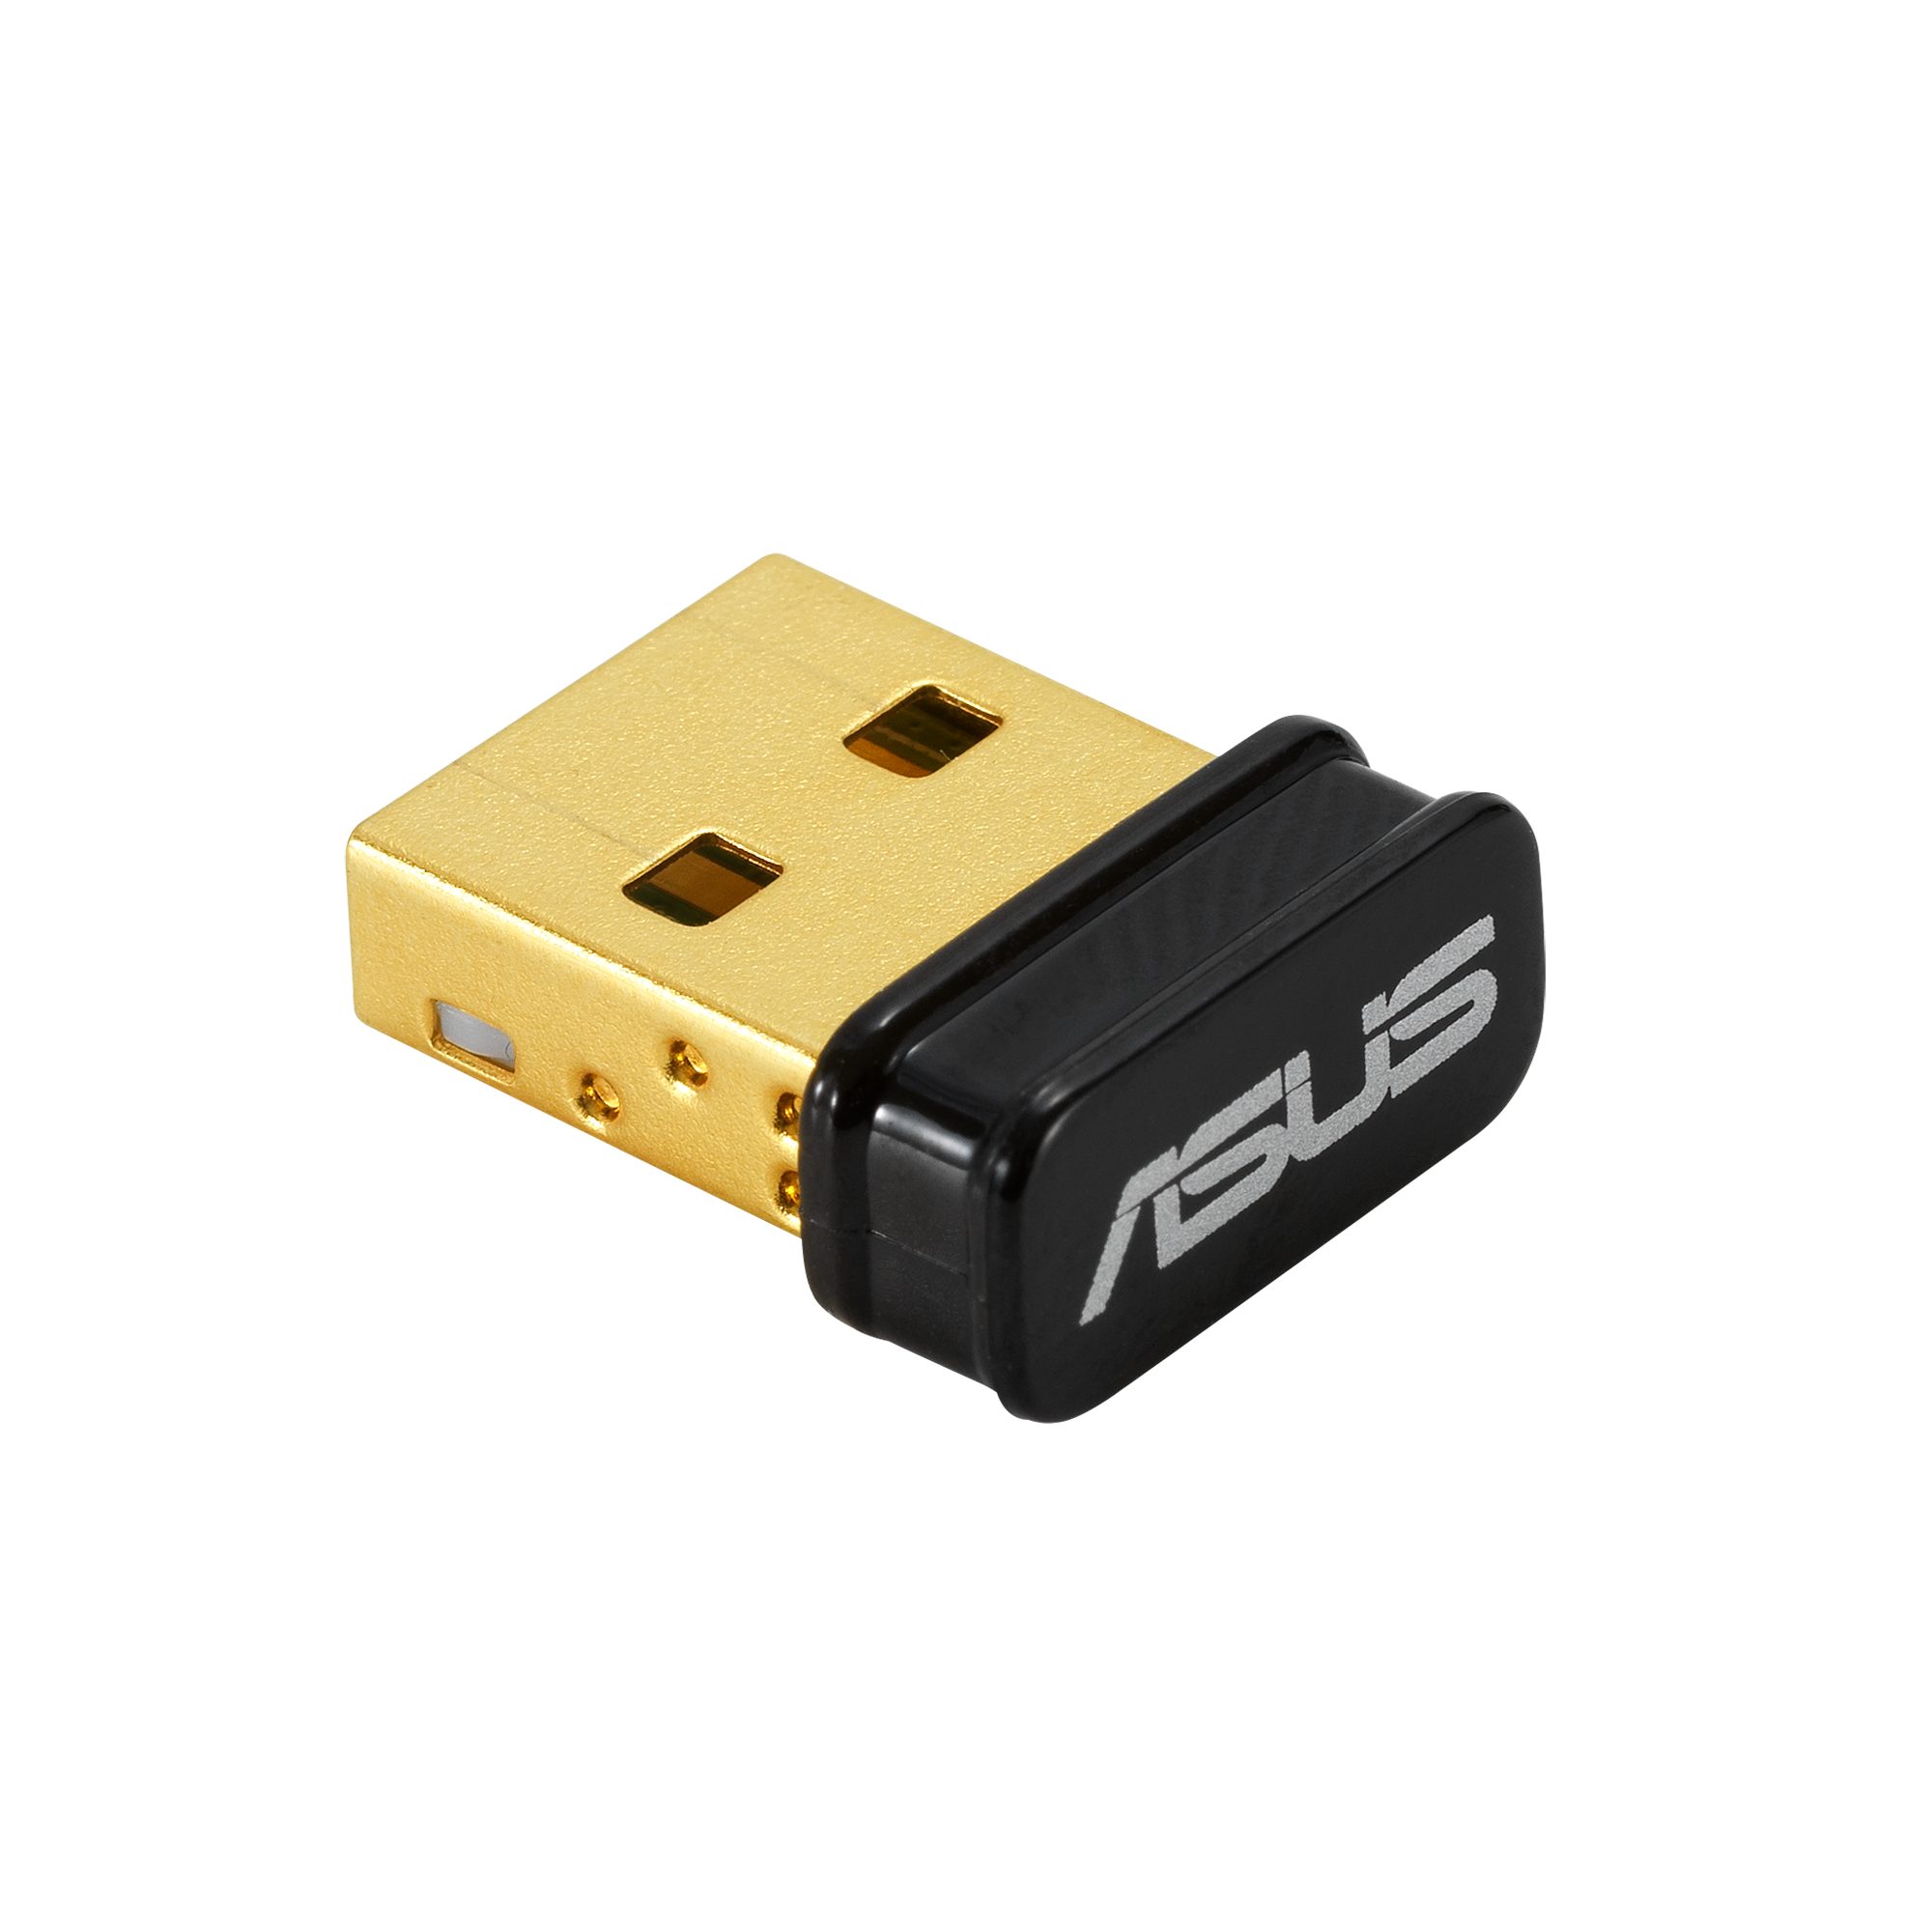 USB-BT500｜Wireless Wired Adapters｜ASUS